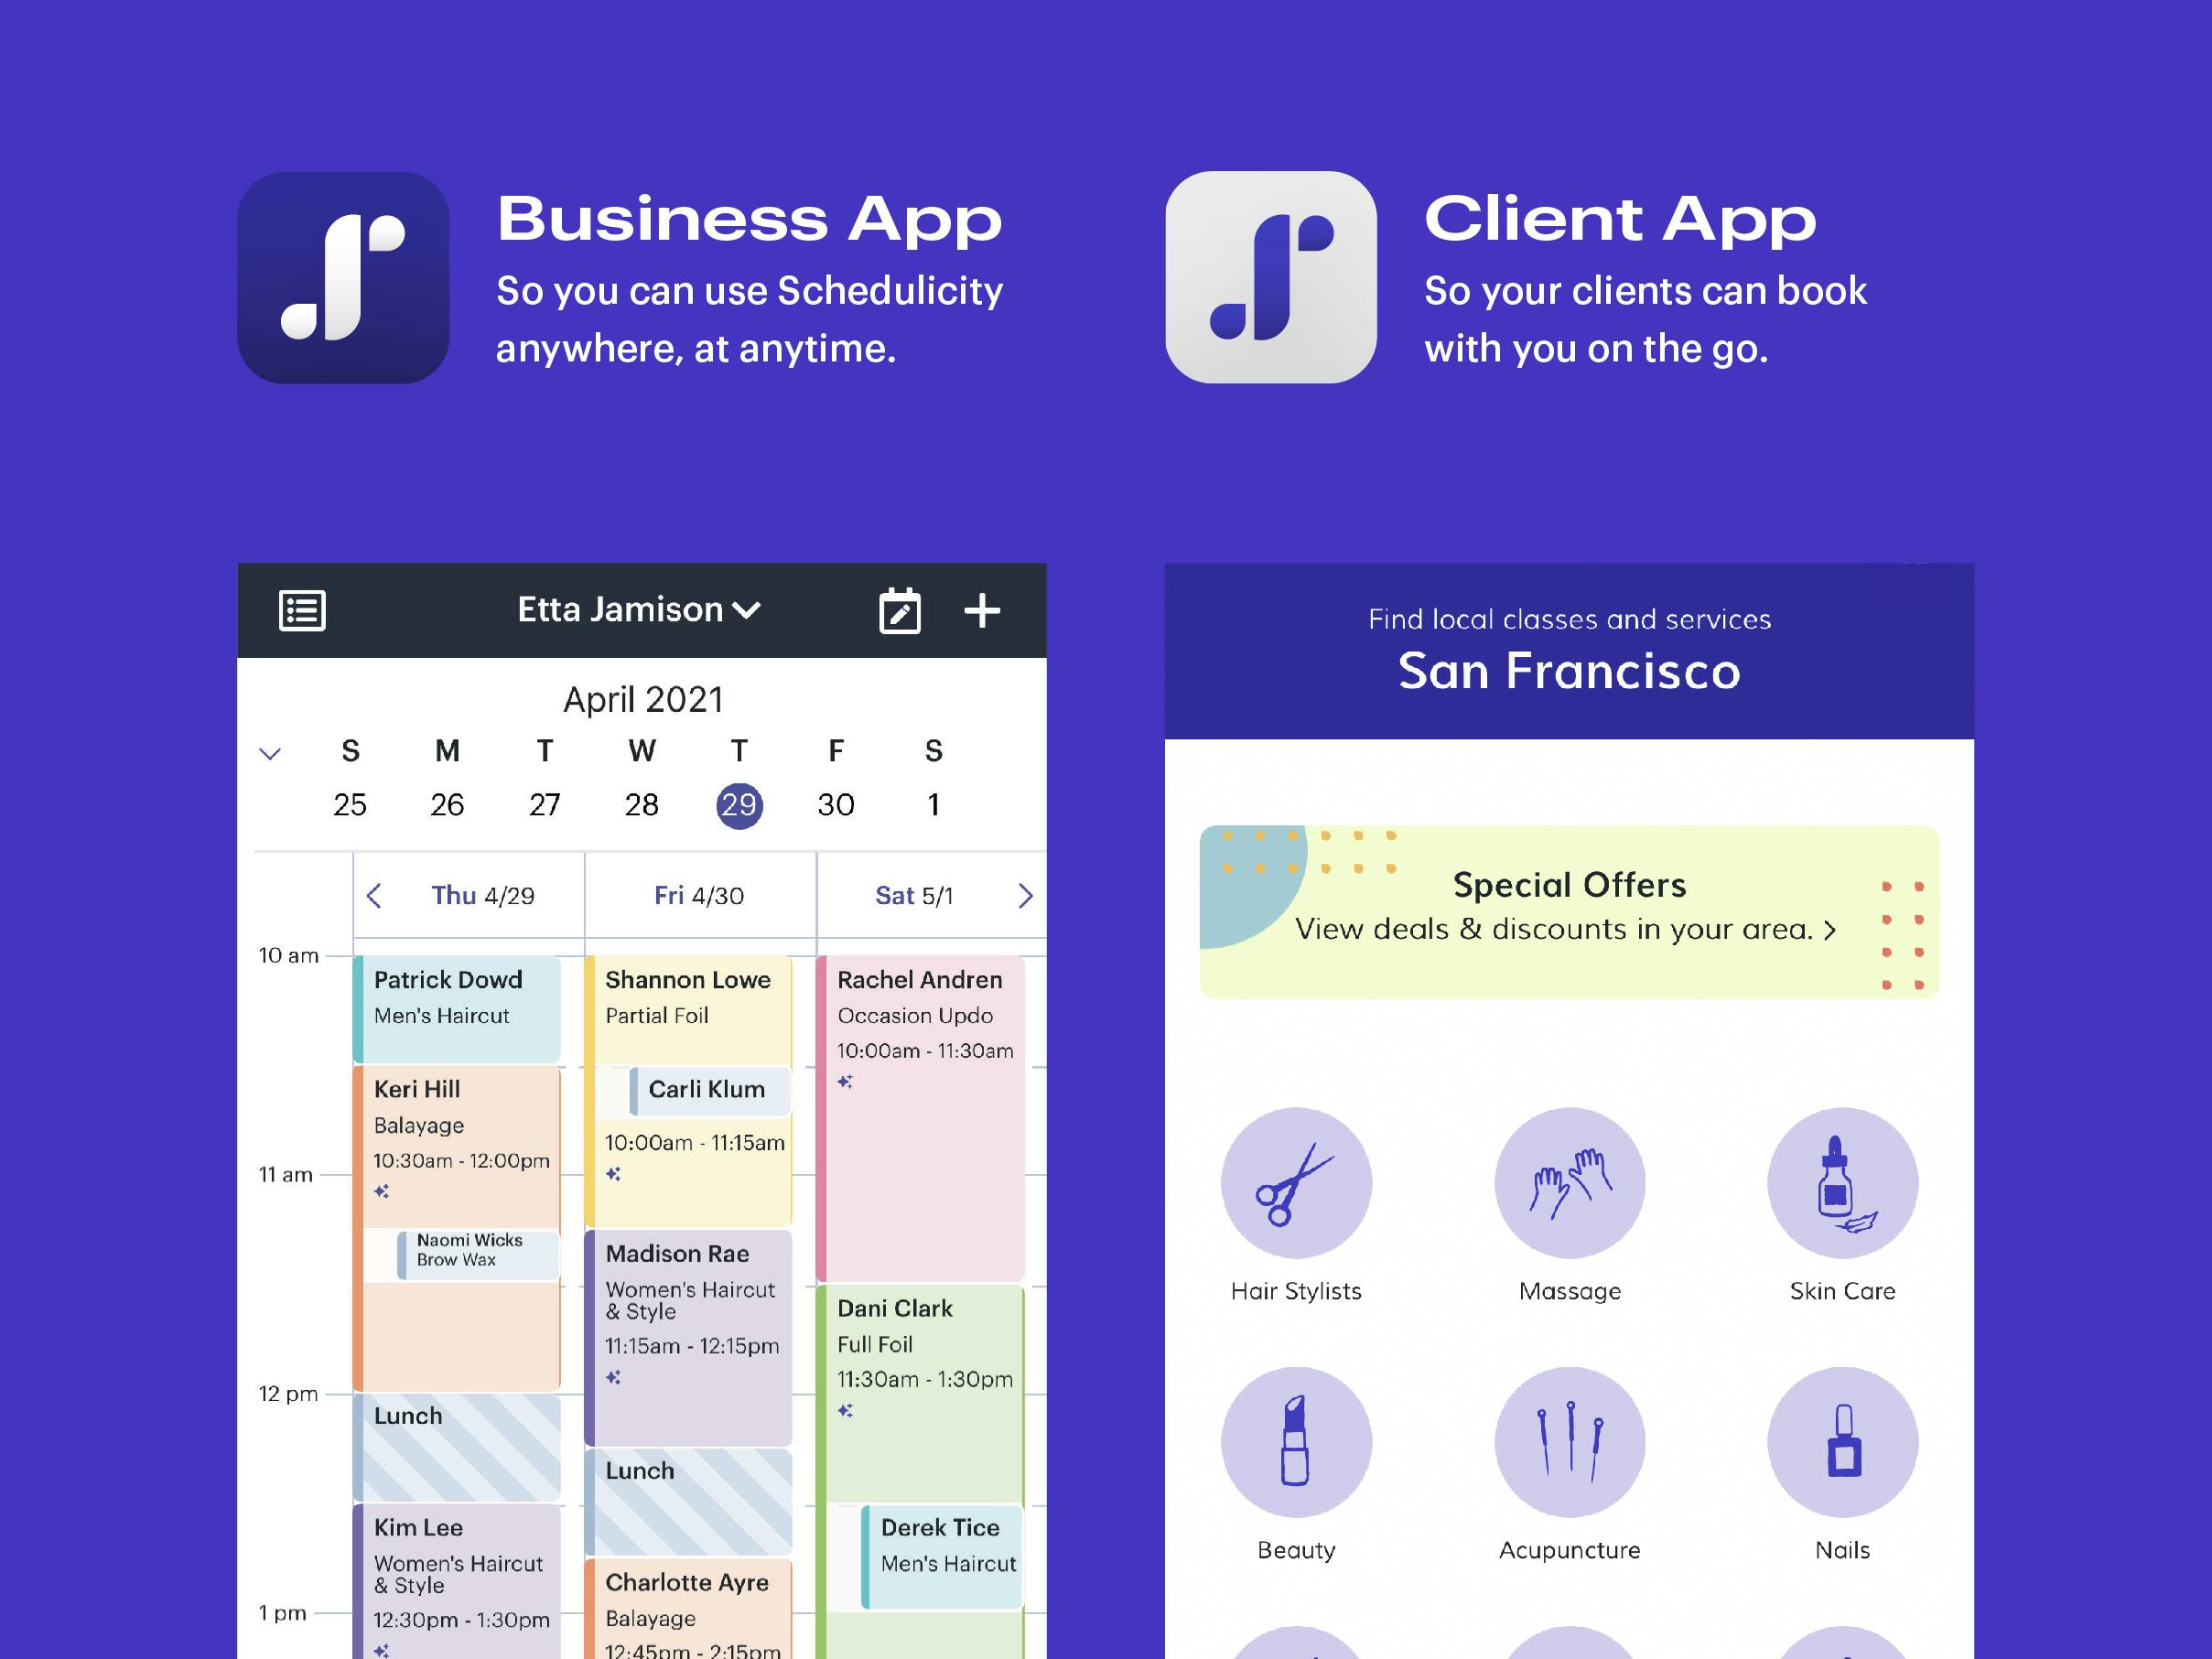 Schedulicity Software - Business App + Client App: So you can use Schedulicity anywhere, at anytime and your clients can book with you on the go.